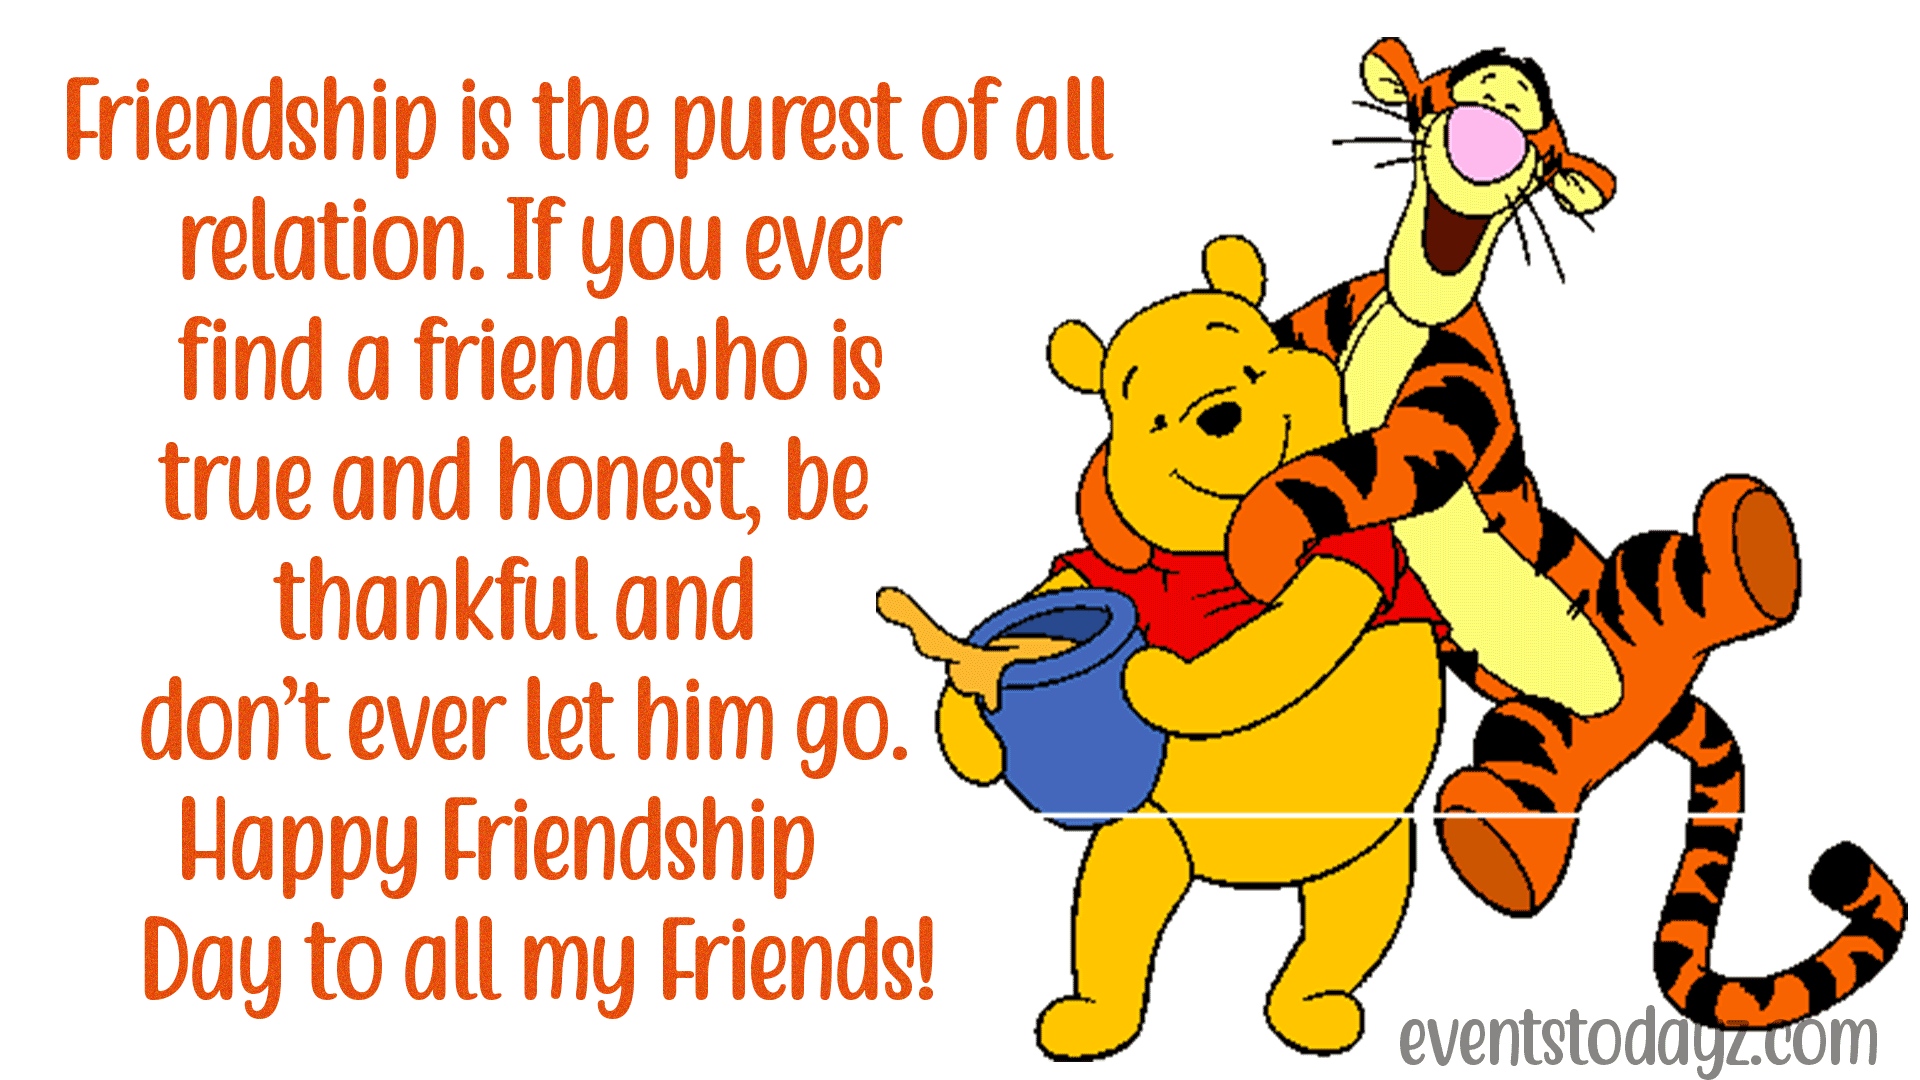 Happy Friendship Day Wishes & Messages | Friendship Day GIF